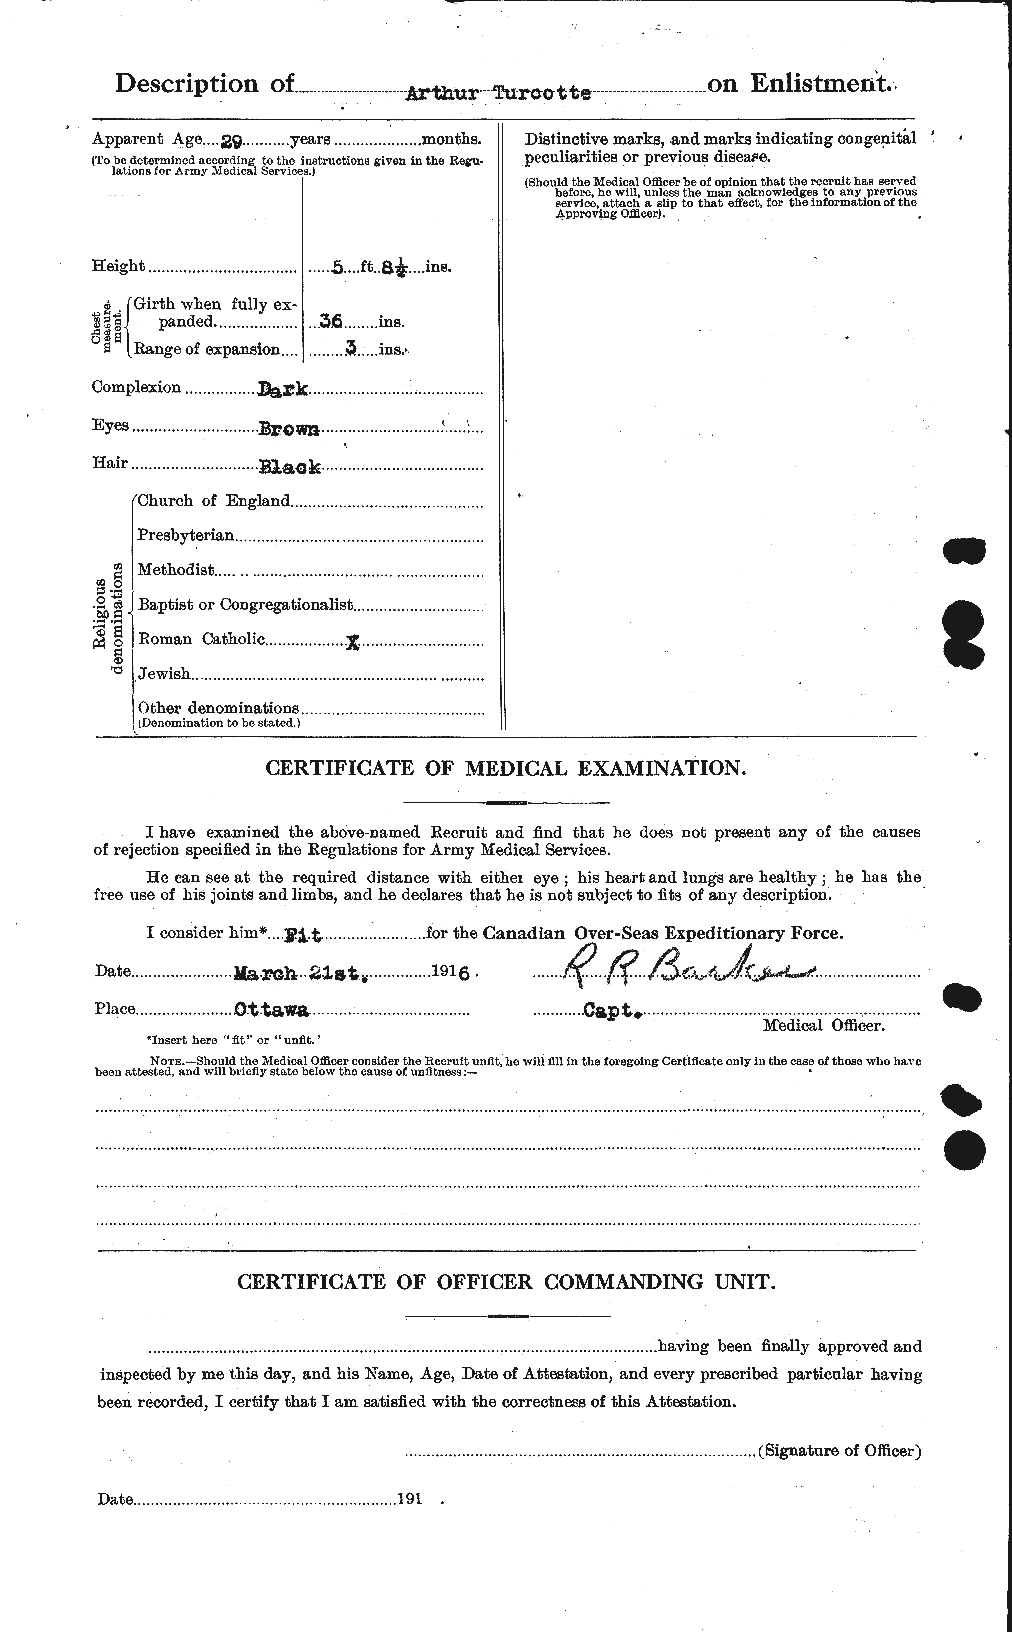 Personnel Records of the First World War - CEF 642268b